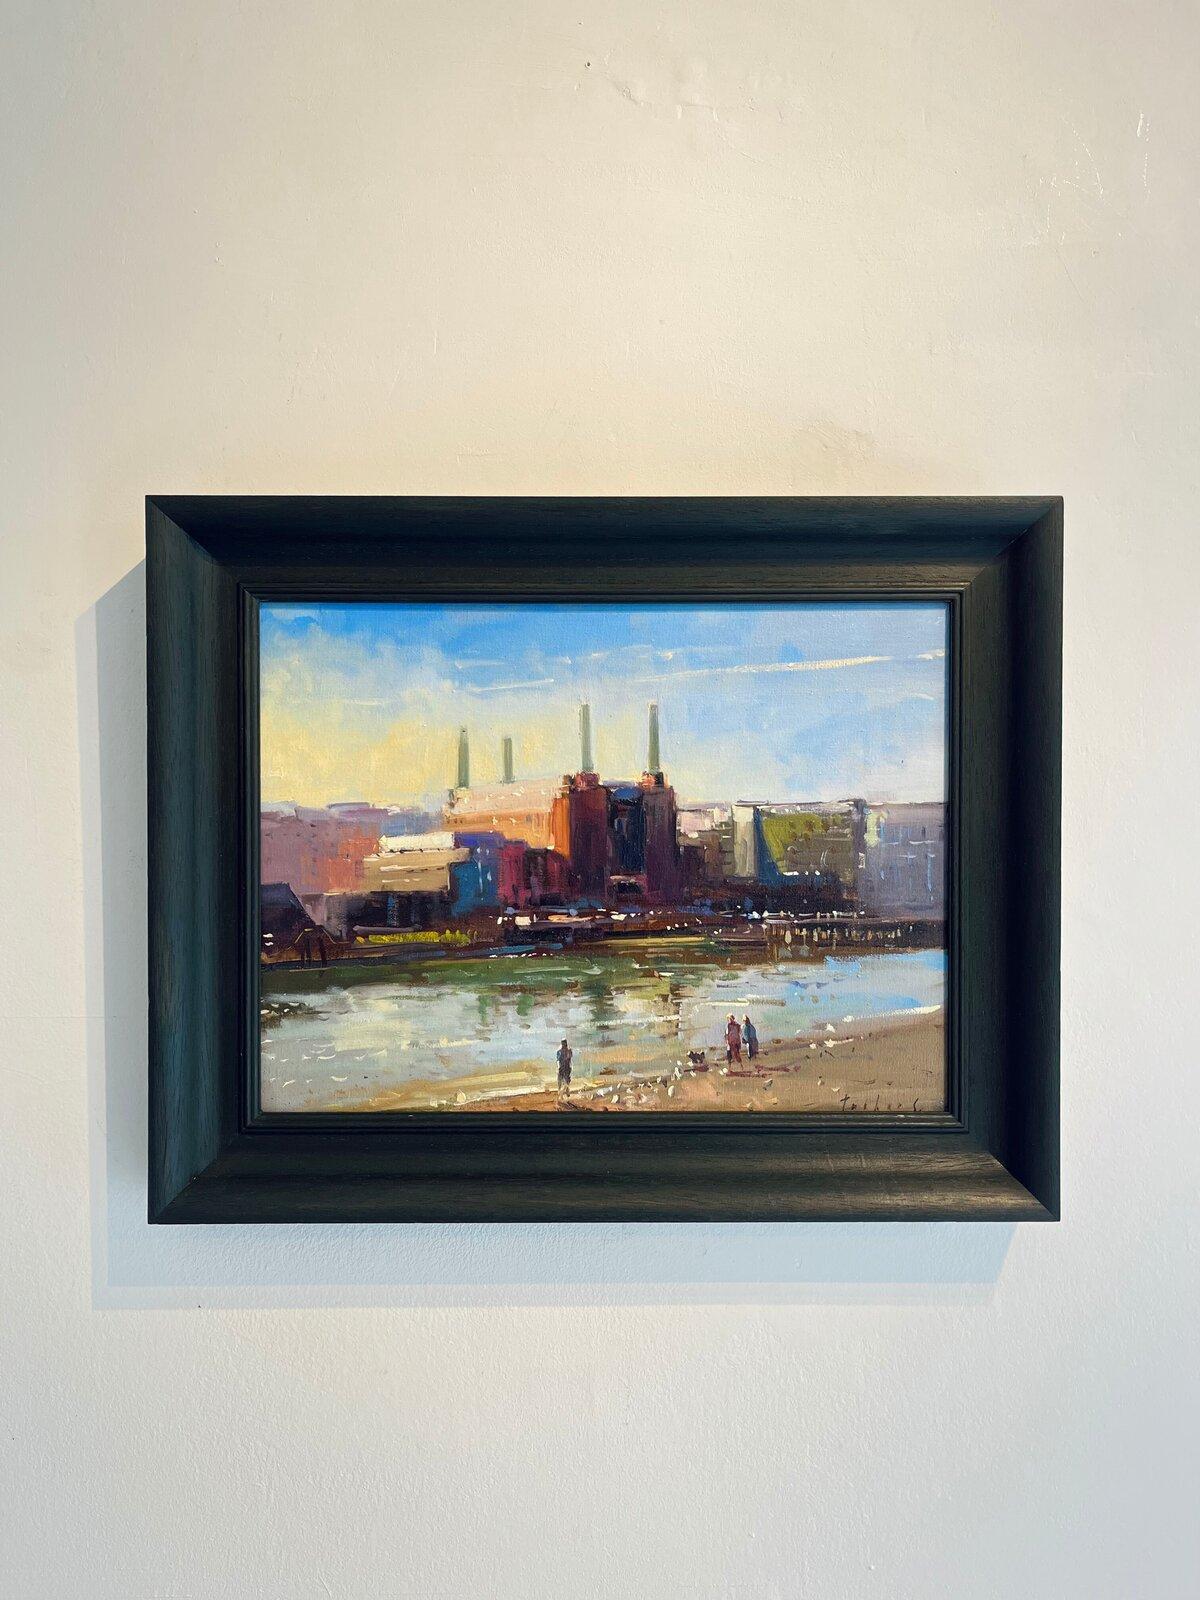 Low Tide, Battersea Power Station-original impressionism cityscape oil painting - Painting by Tushar Sabale